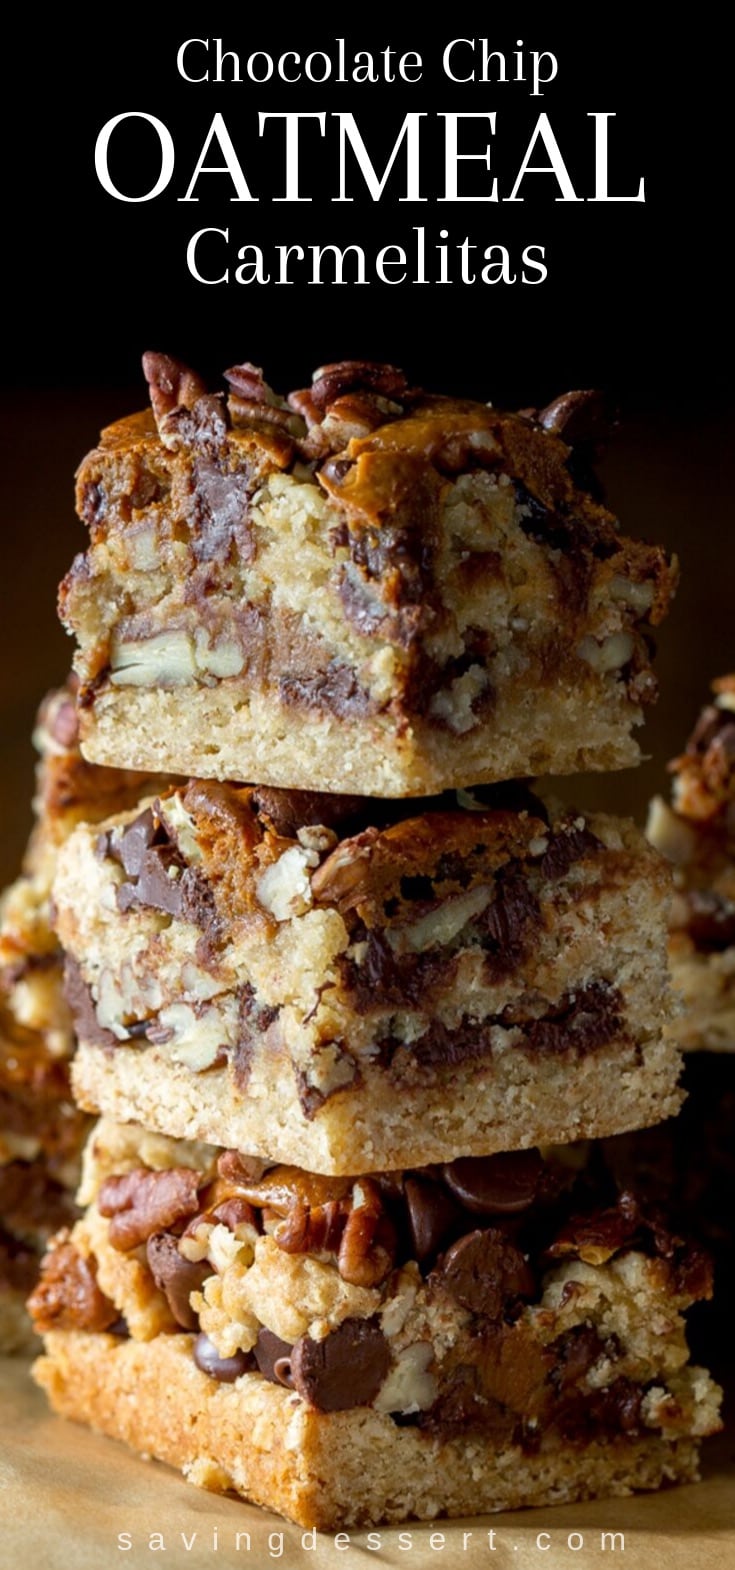 A stack of chocolate chip oatmeal carmelitas